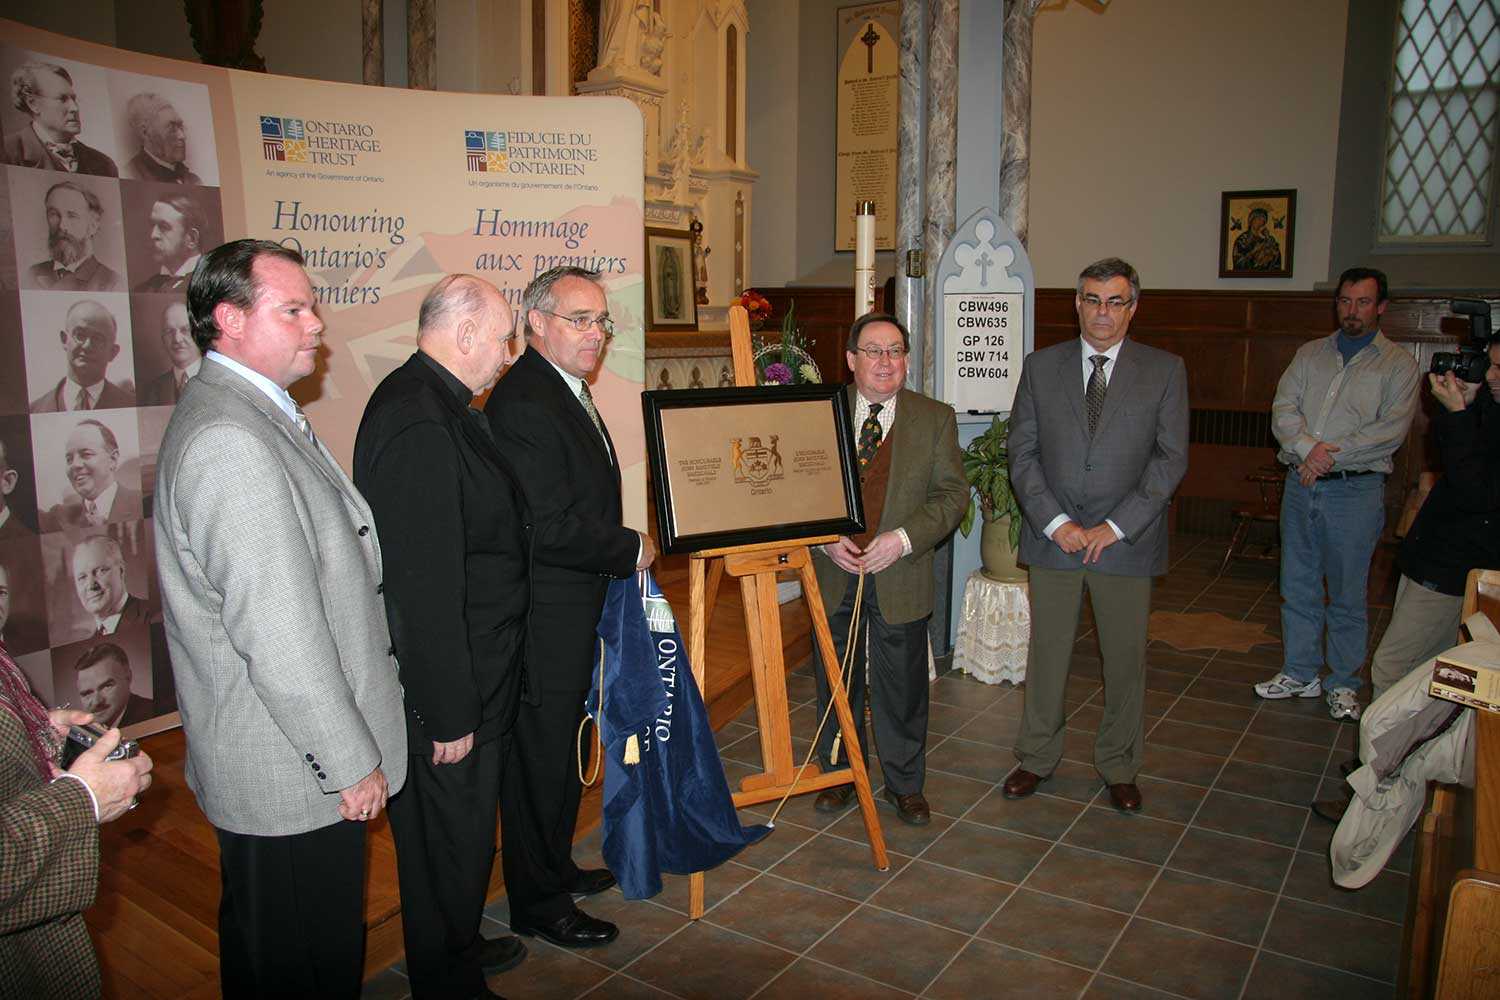 From left: Bryan McGillis, Mayor of the Township of South Stormont; Father Bernard Cameron, St. Andrews Church; Jim Brownell, MPP, Stormont-Dundas-South Glengarry; Alan McDonald Sullivan, Board member, Ontario Heritage Trust; and Michel Labreque, descendant of John Sandfield Macdonald (Photo: Kevin Lamoureux)